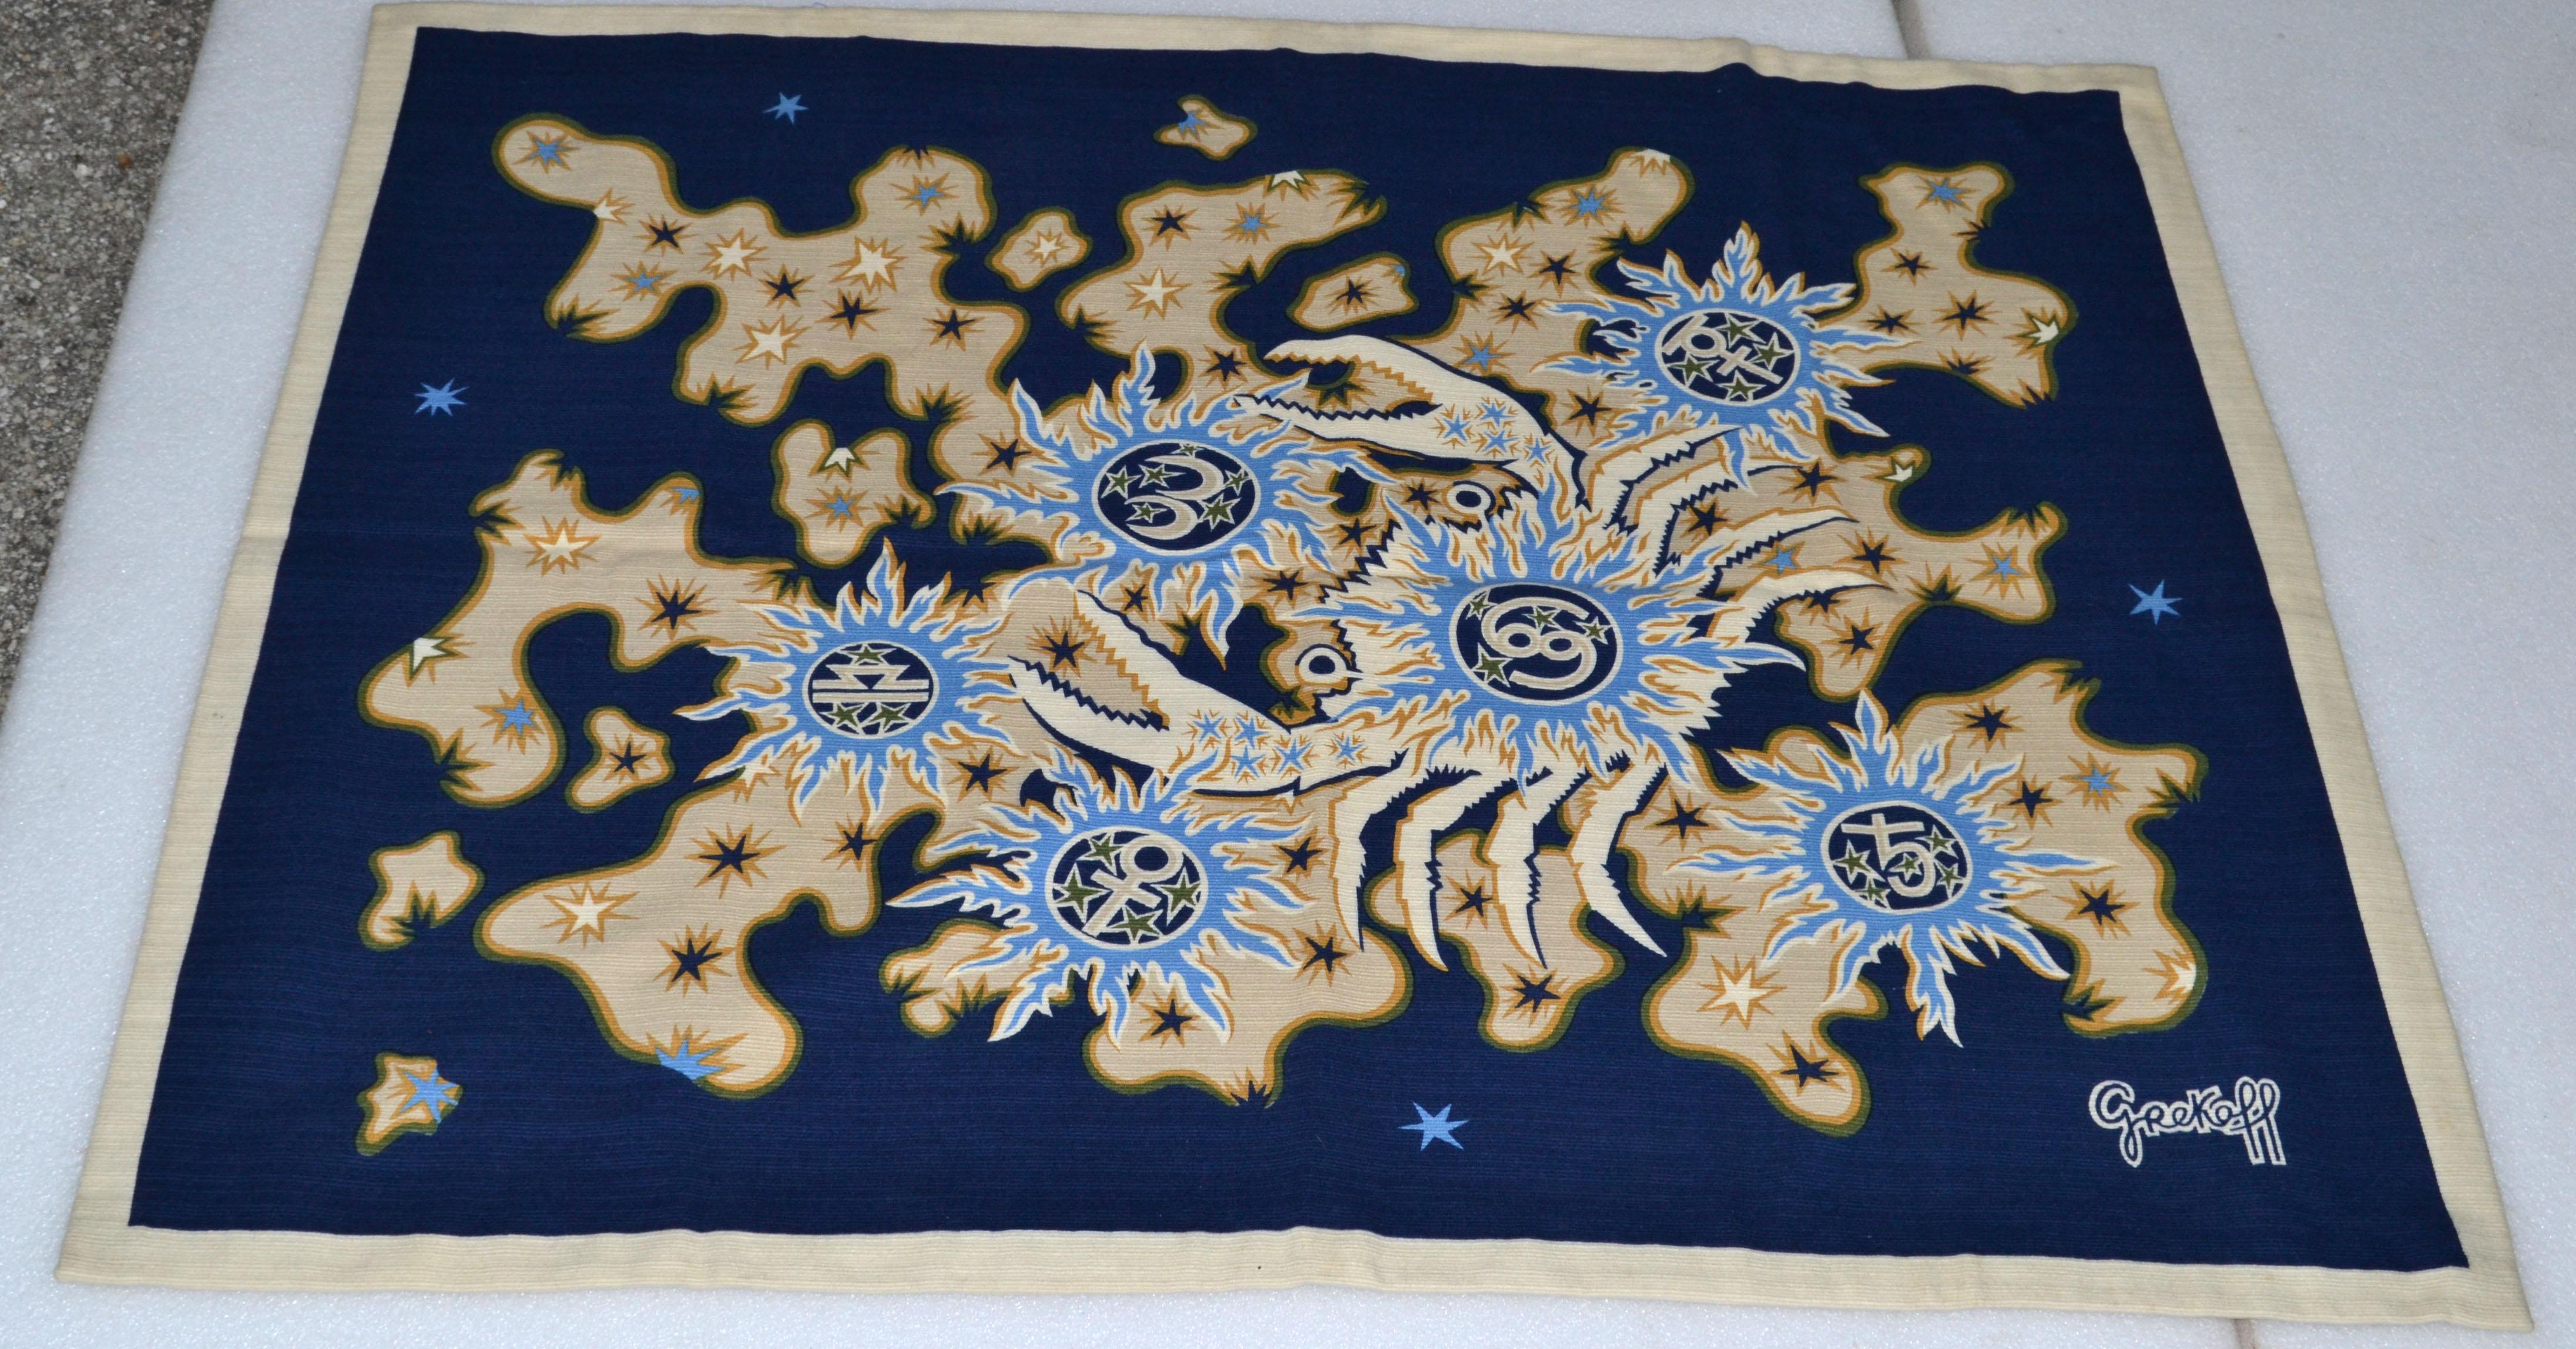 Signed Zodiac Grekoff handwoven tapestry in wool & cotton, titled Cancer.
Marked at the Front right corner and proof of authenticity on the reverse.